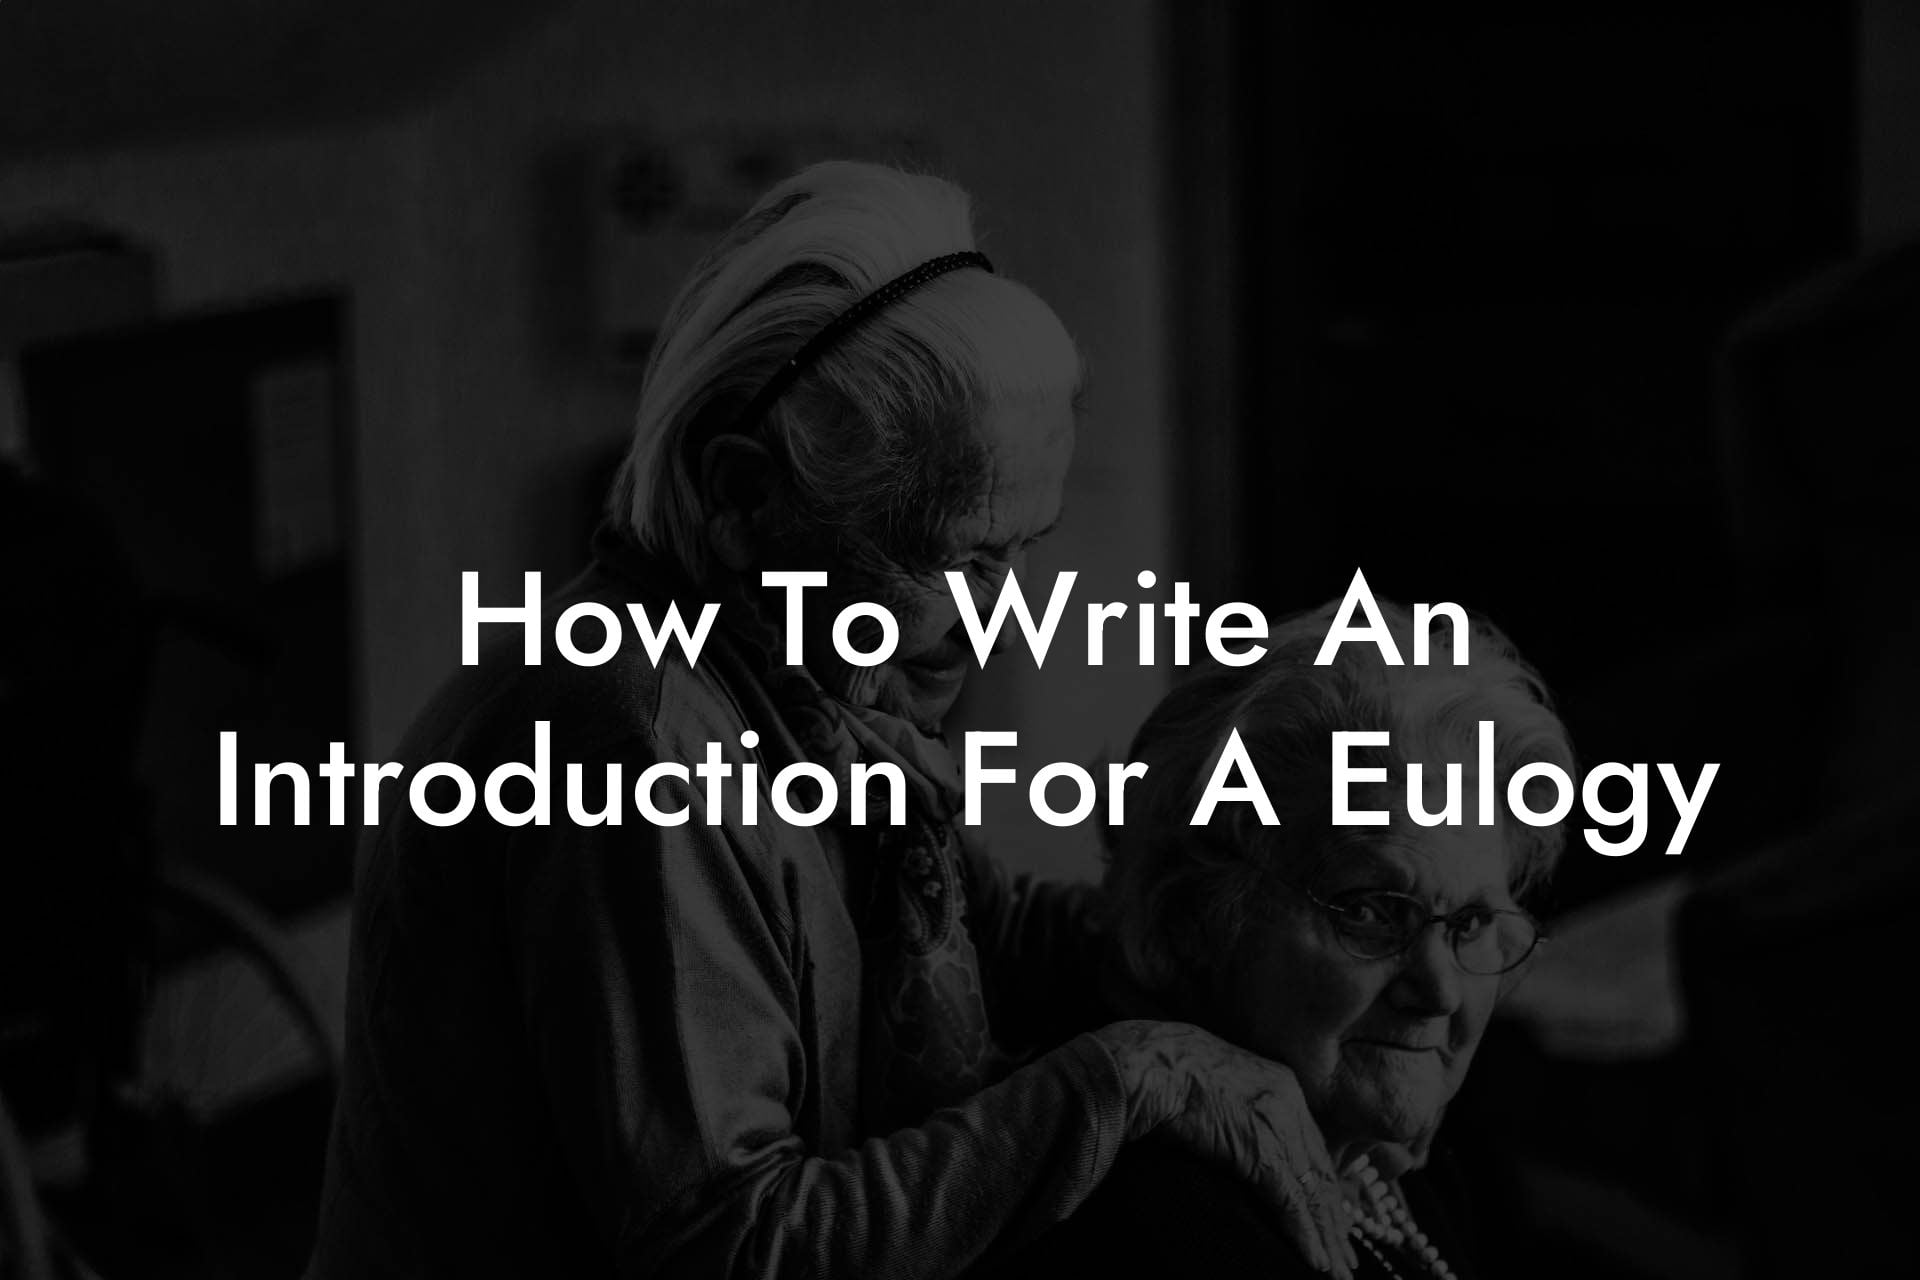 How To Write An Introduction For A Eulogy